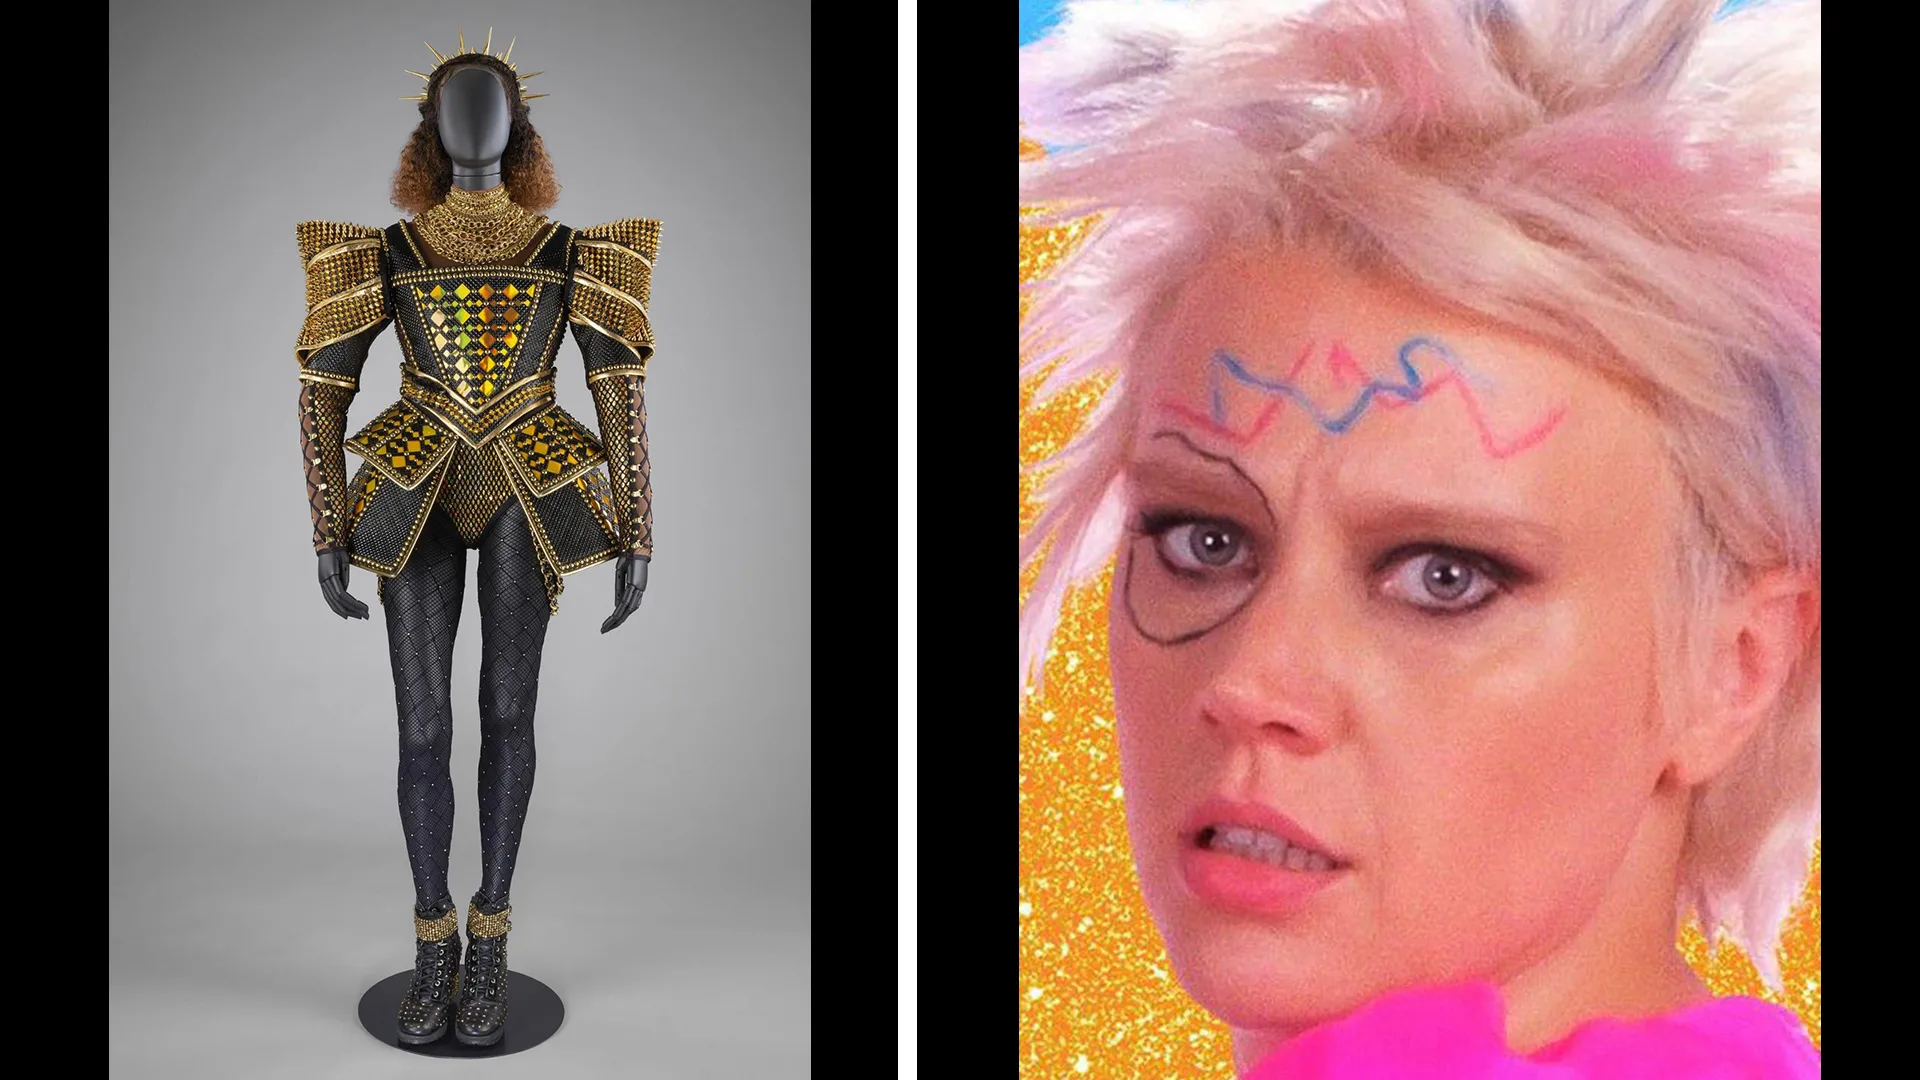 A photograph of the gold costume from SIX the musical spliced next to a photograph of Weird Barbie